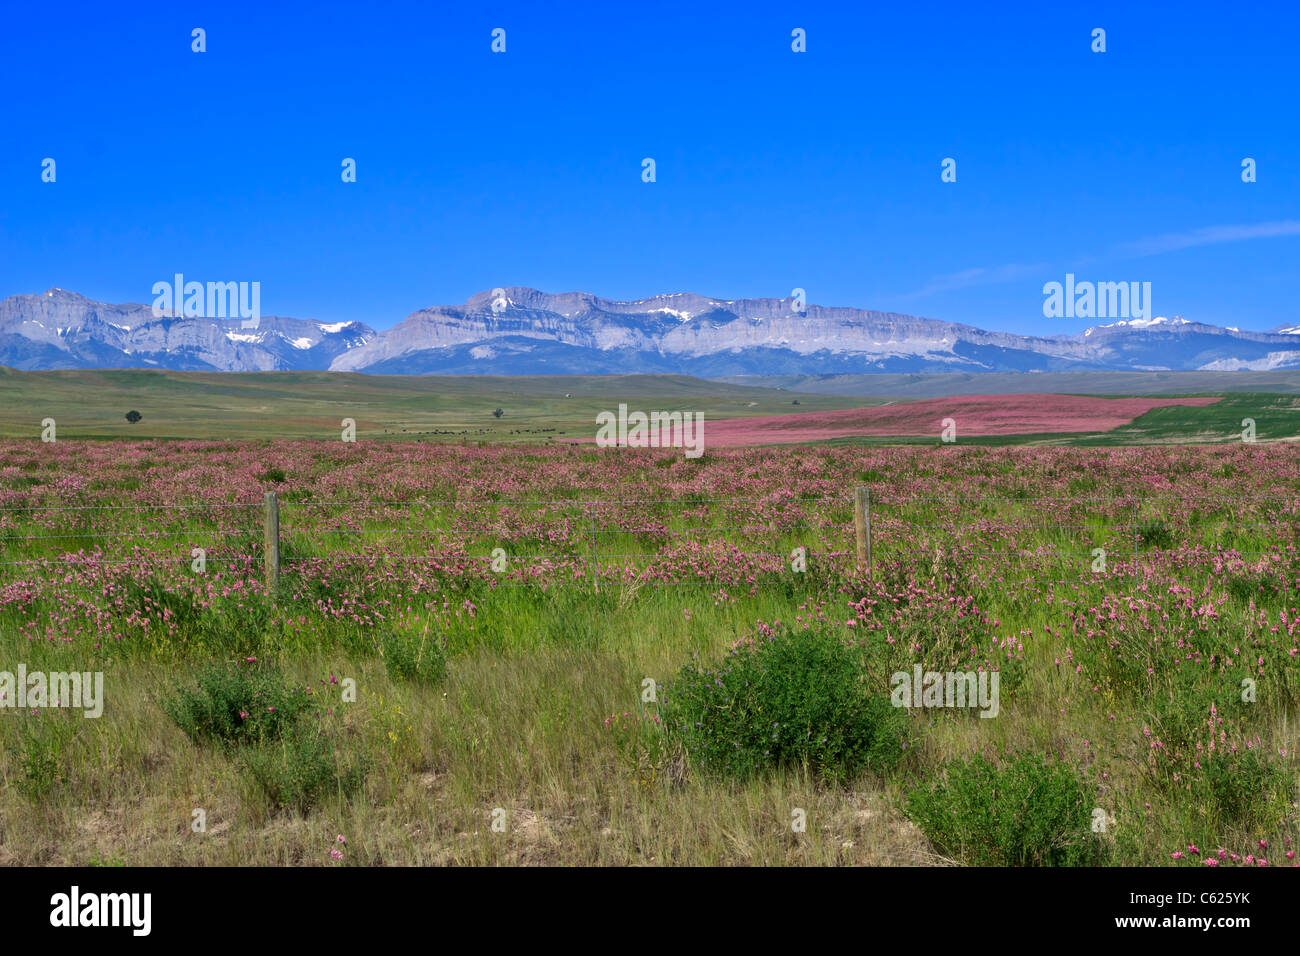 Purple fields of hairy vetch in pastureland east of the Rocky Mountains in Montana. Stock Photo